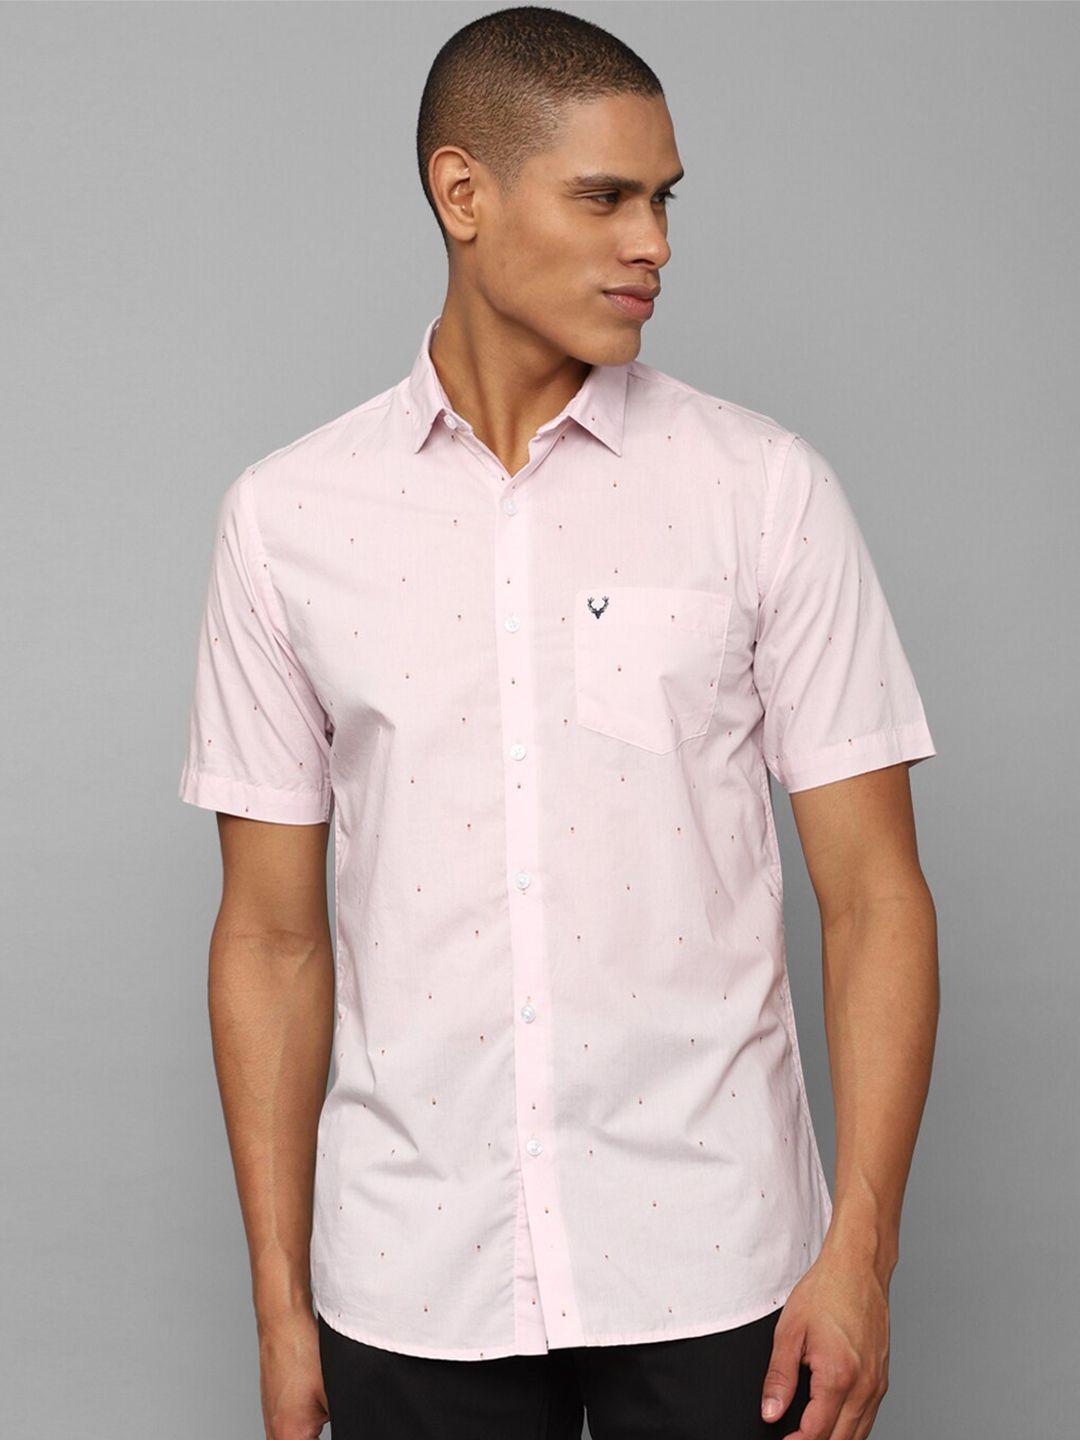 allen-solly-men-slim-fit-printed-pure-cotton-casual-shirt